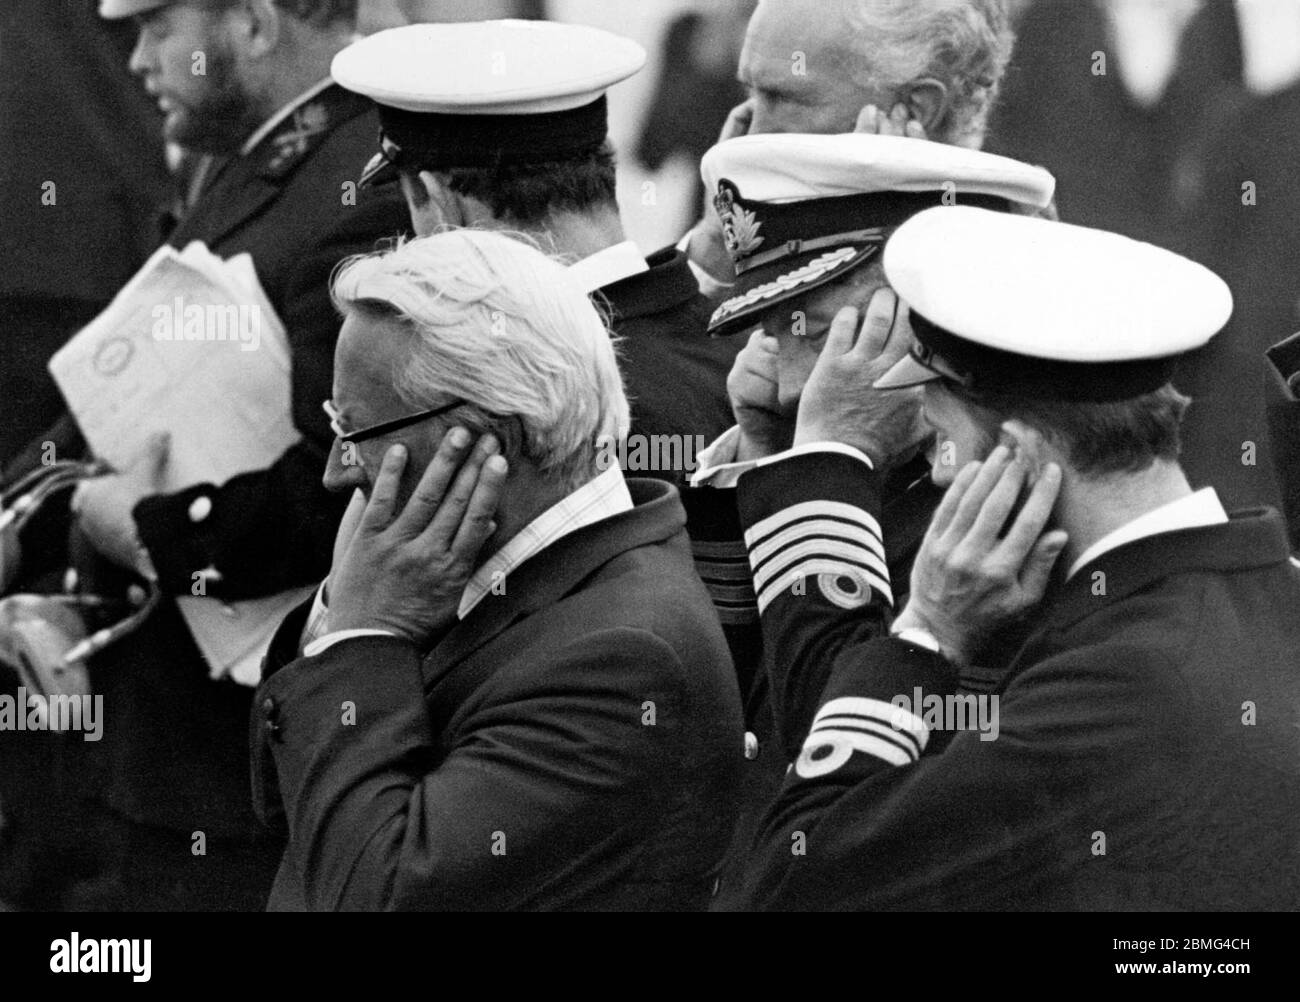 AJAXNETPHOTO. 31ST AUG 1975.LONDON, ENGLAND. - DEAF EARS - FT CLIPPER RACE -  MR EDWARD HEATH, PICTURED WITH EARS BOXED, WITH THE COMMANDER OF THE FRIGATE HMS LONDONDERRY AND OTHER OFFICERS AS THE SHIP'S  SALUTING CANNON WAS FIRED TO START FOUR YACHTS ON A RECORD BREAKING ATTEMPT TO REACH SYDNEY, AUSTRALIA, IN UNDER 69 DAYS.  PHOTO:JONATHAN EASTLAND/AJAX REF:750209 4 75 Stock Photo